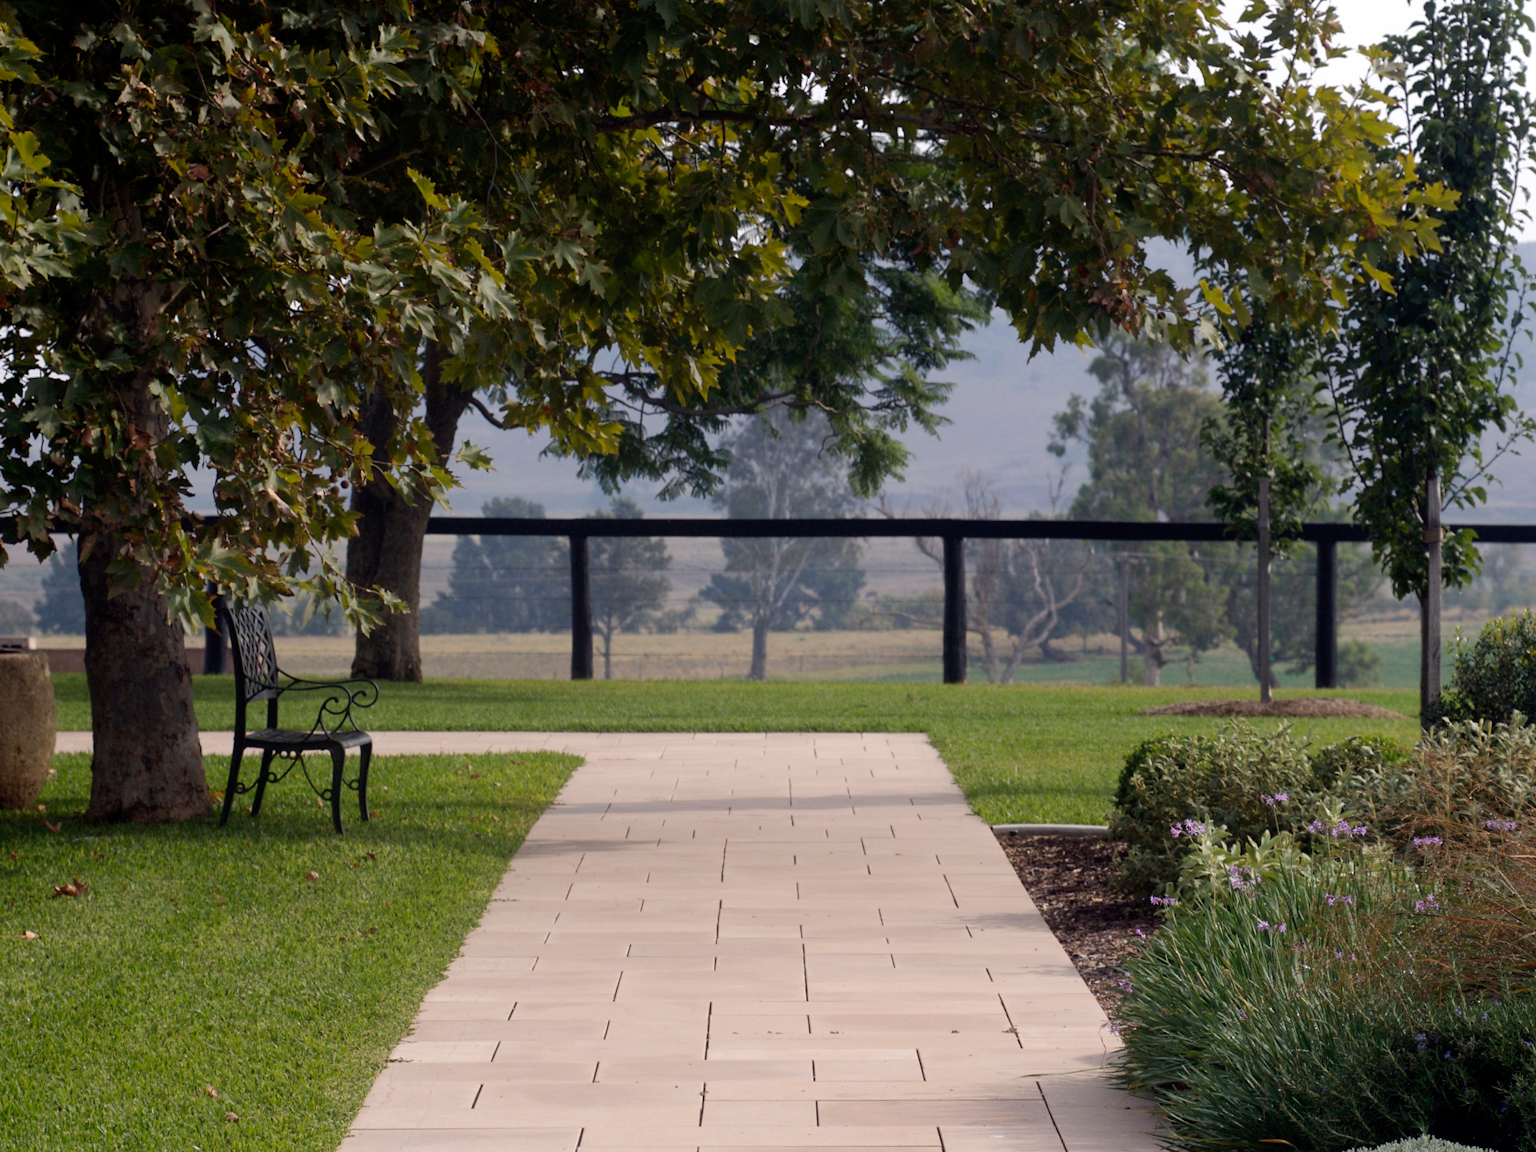 Hawkesbury concrete pavers used in classically designed rural garden setting